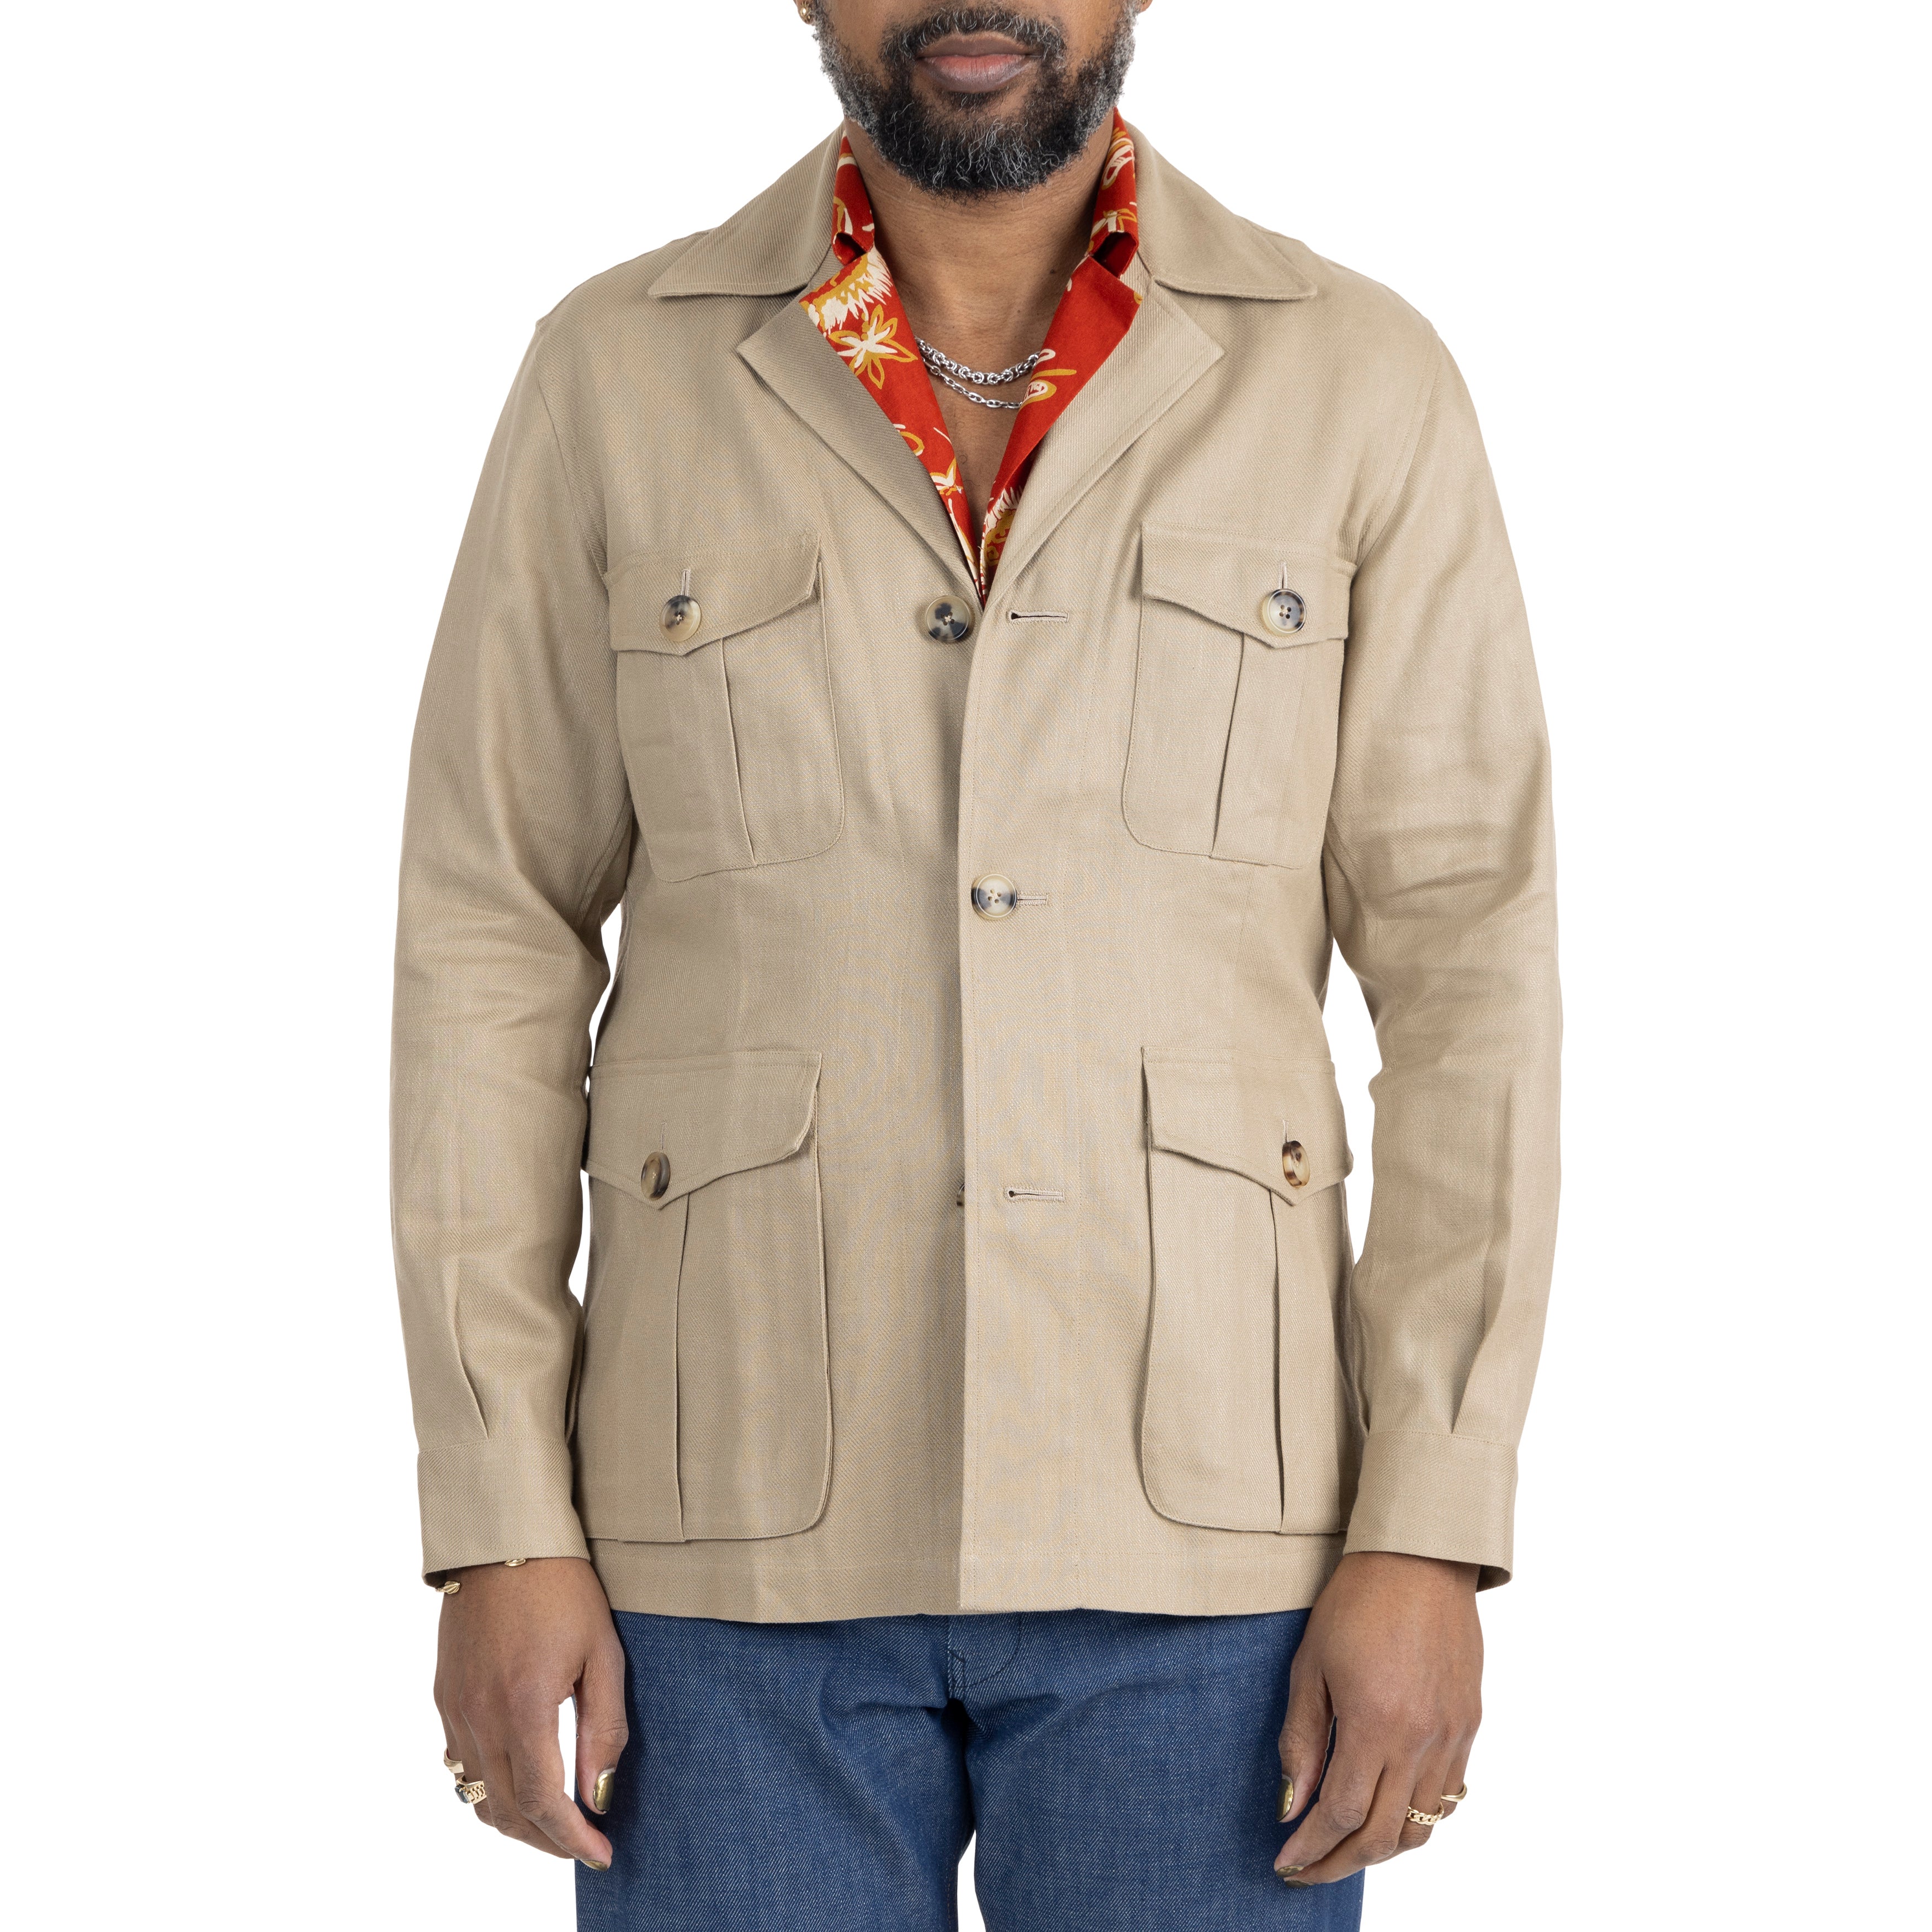 The Armoury by Ascot Chang Safari Jackets - The Armoury